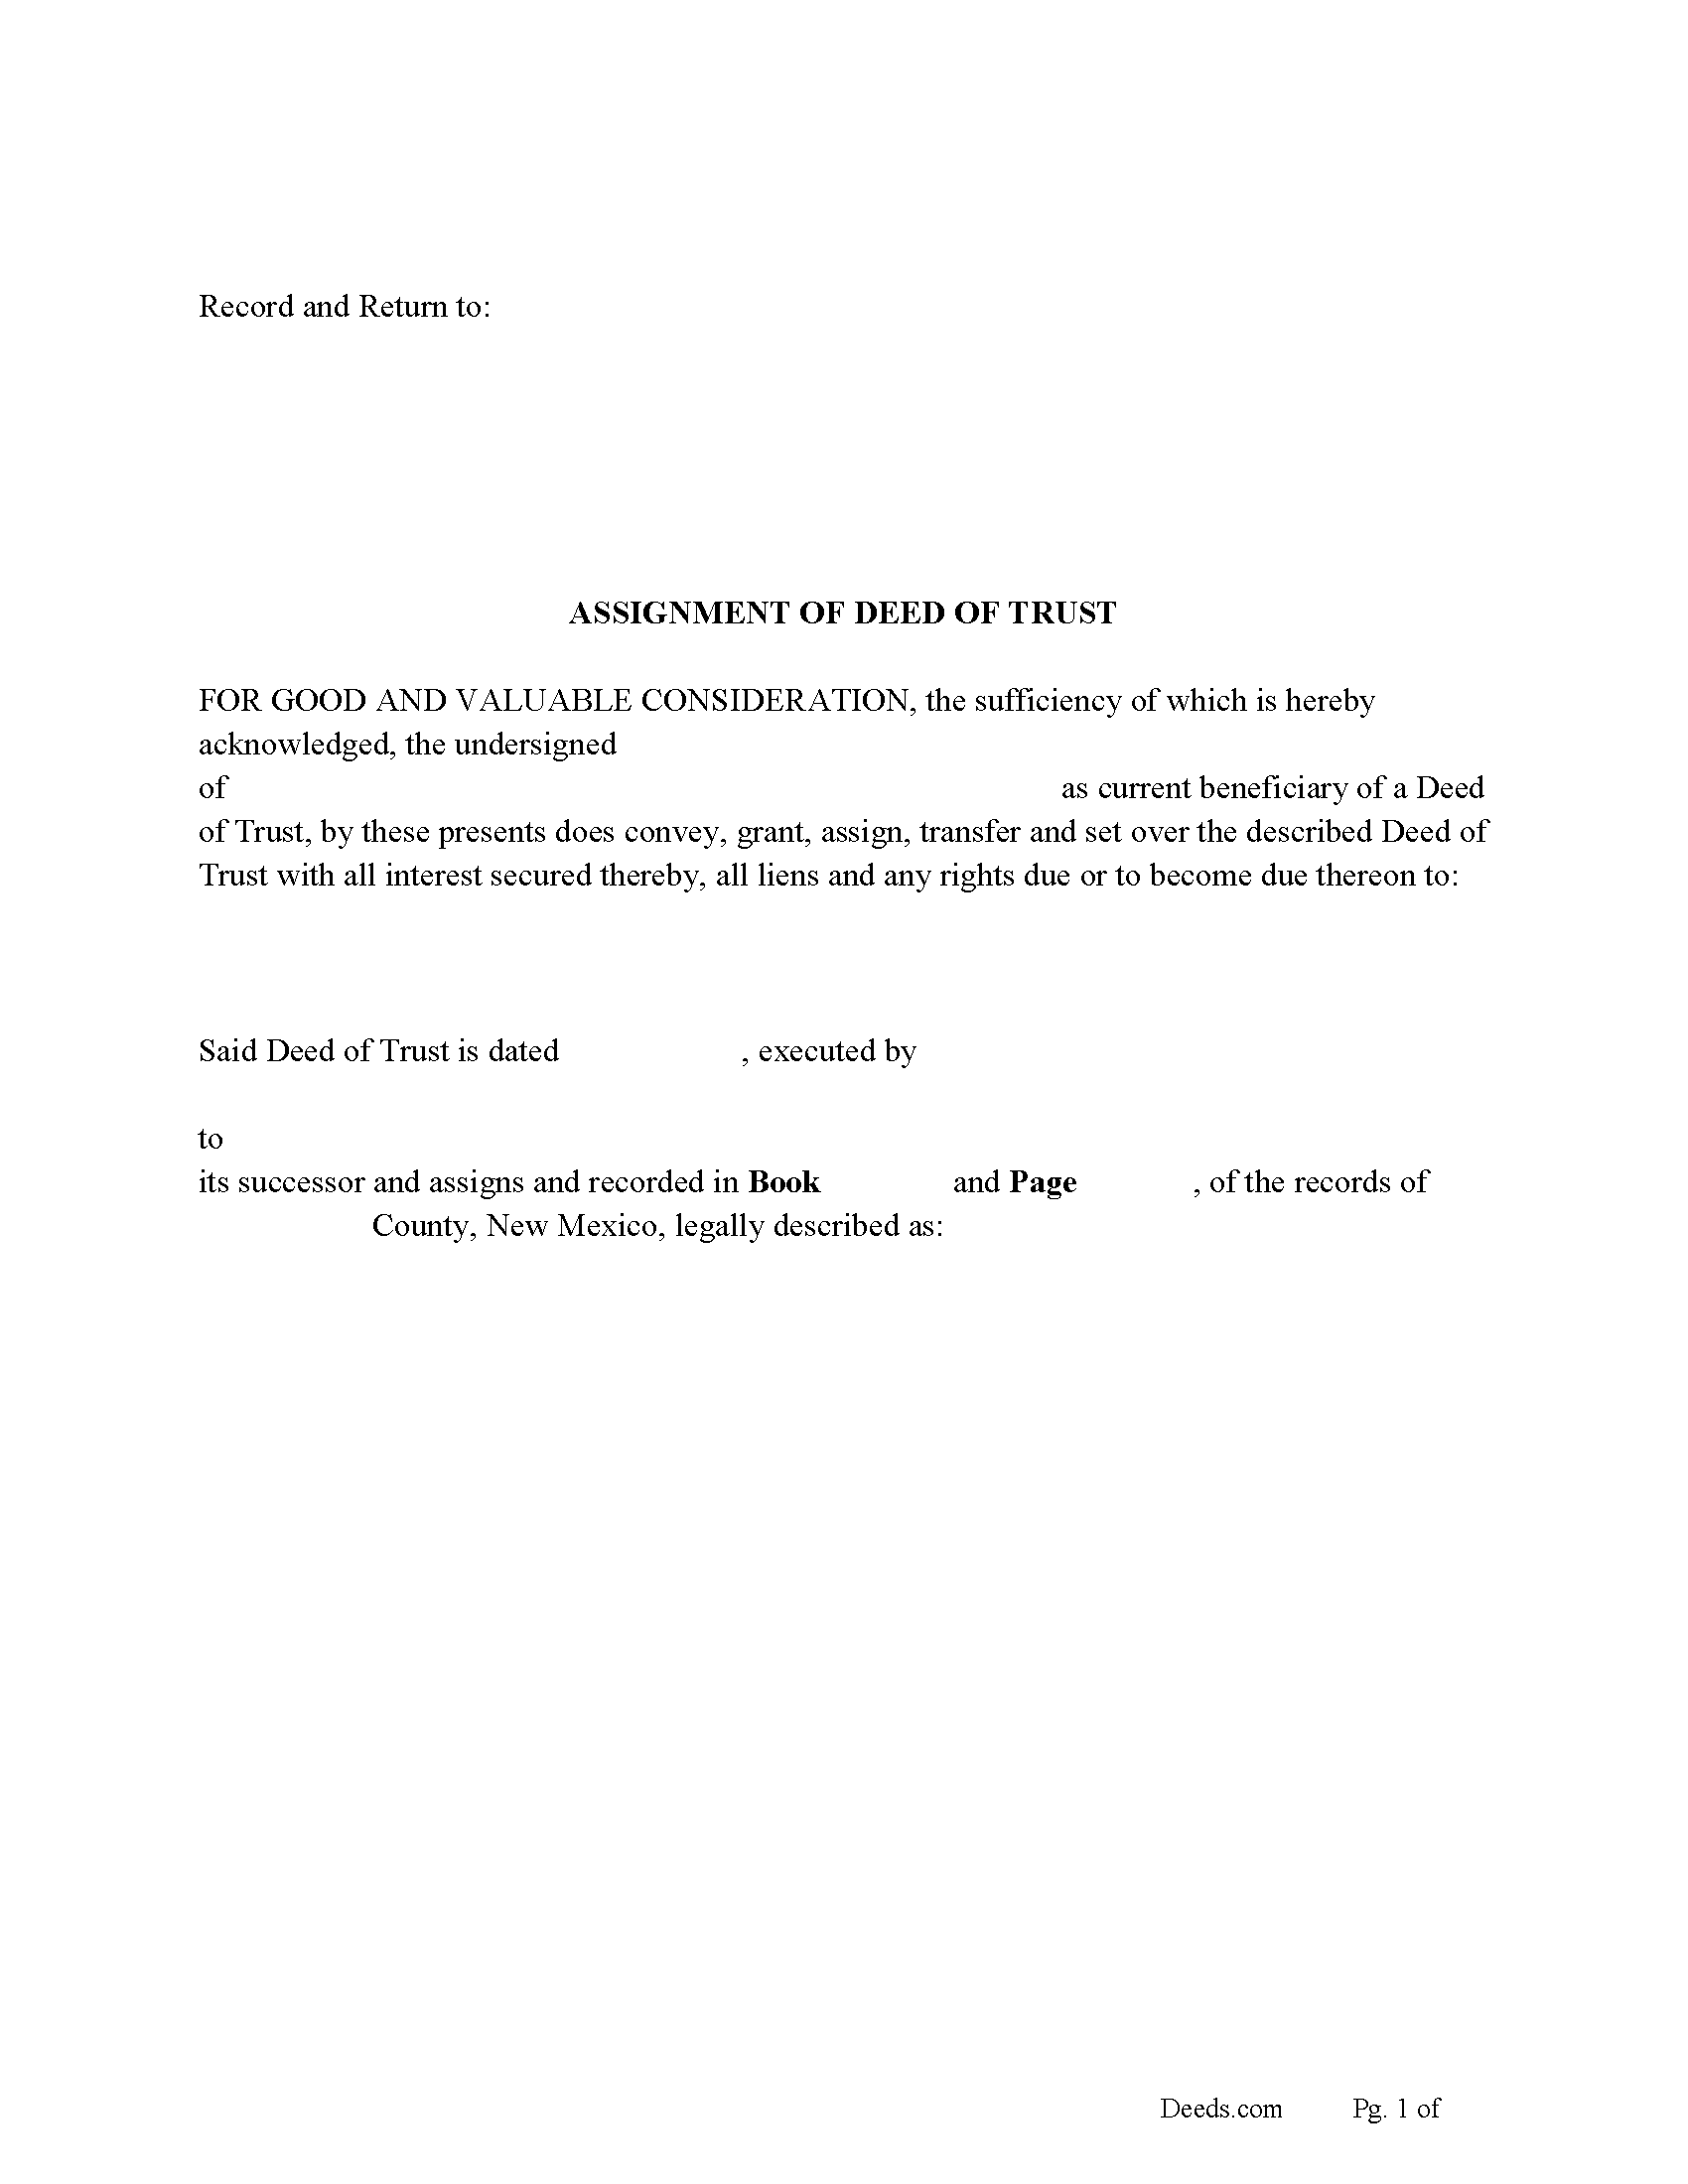 New Mexico Assignment of Deed of Trust Image